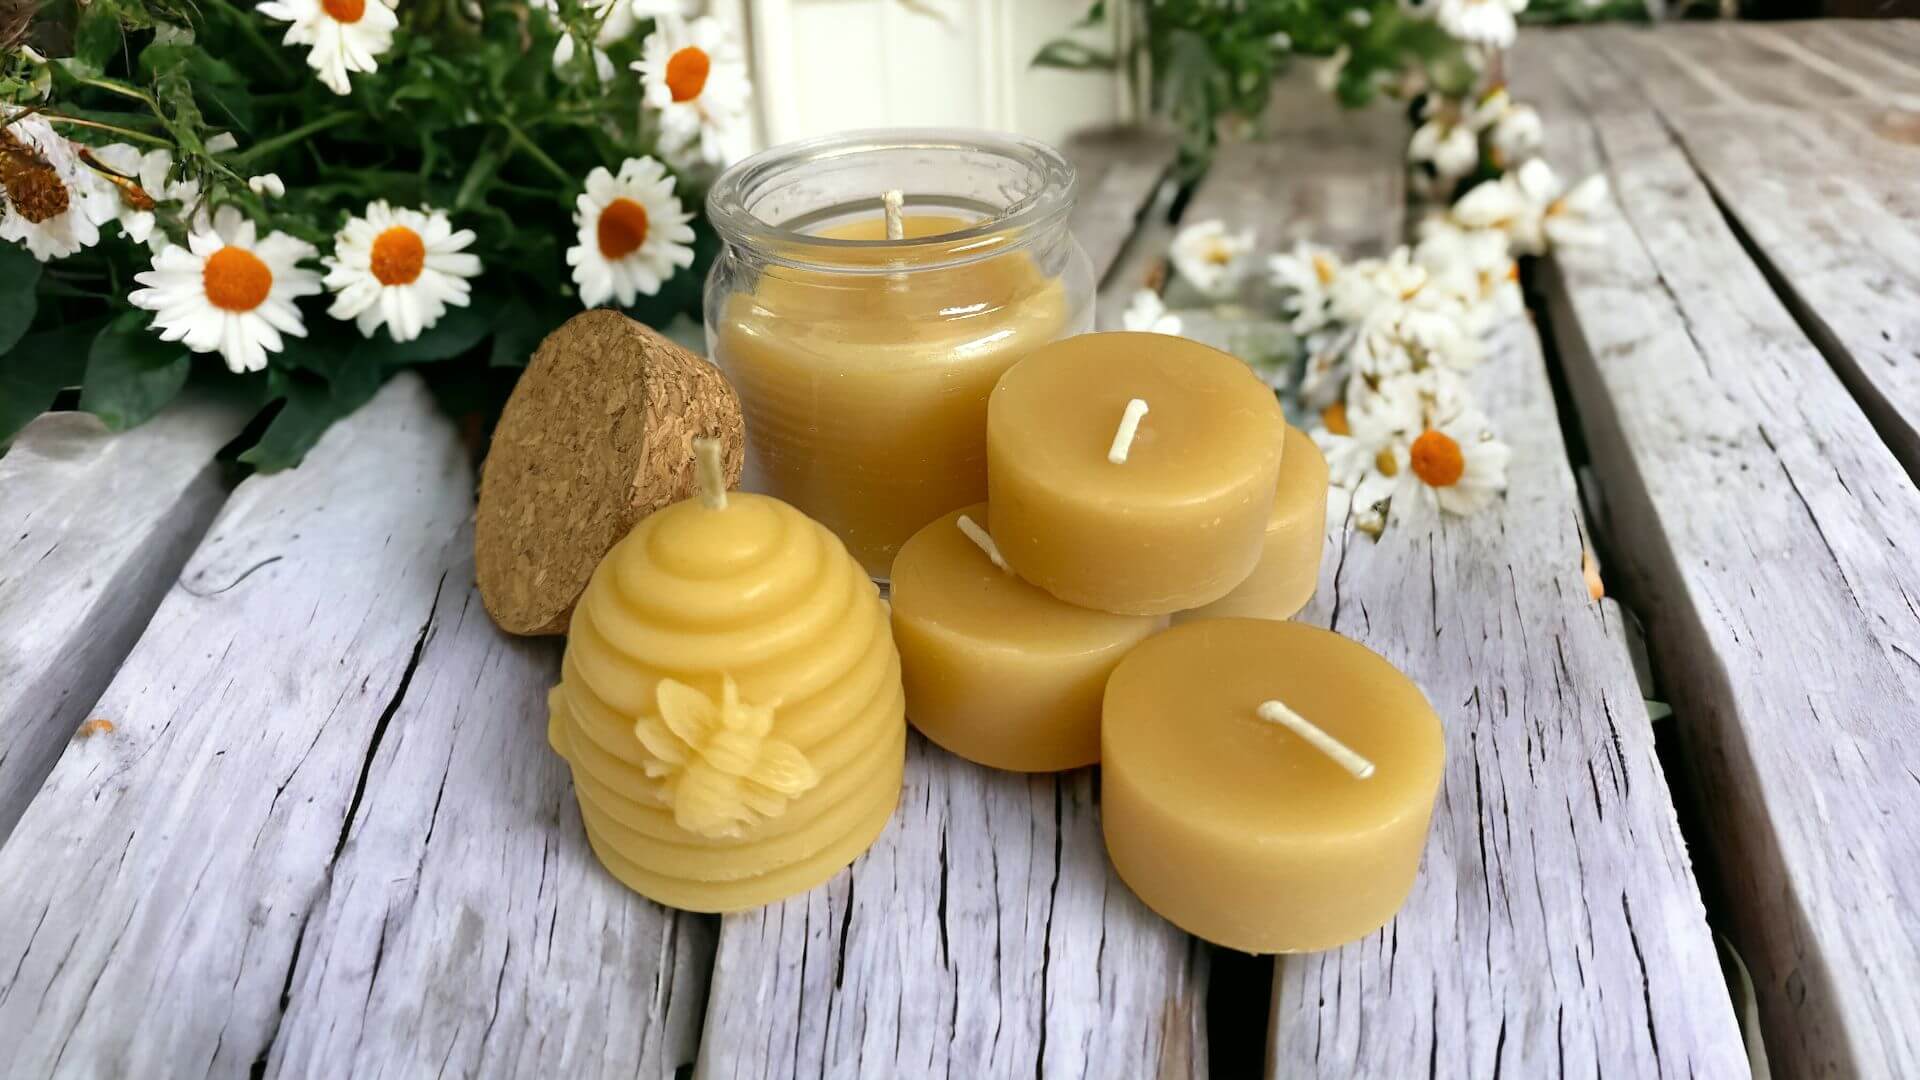 DIY Beeswax Gifts: Lip balm, Candles, and Beeswax Wraps!